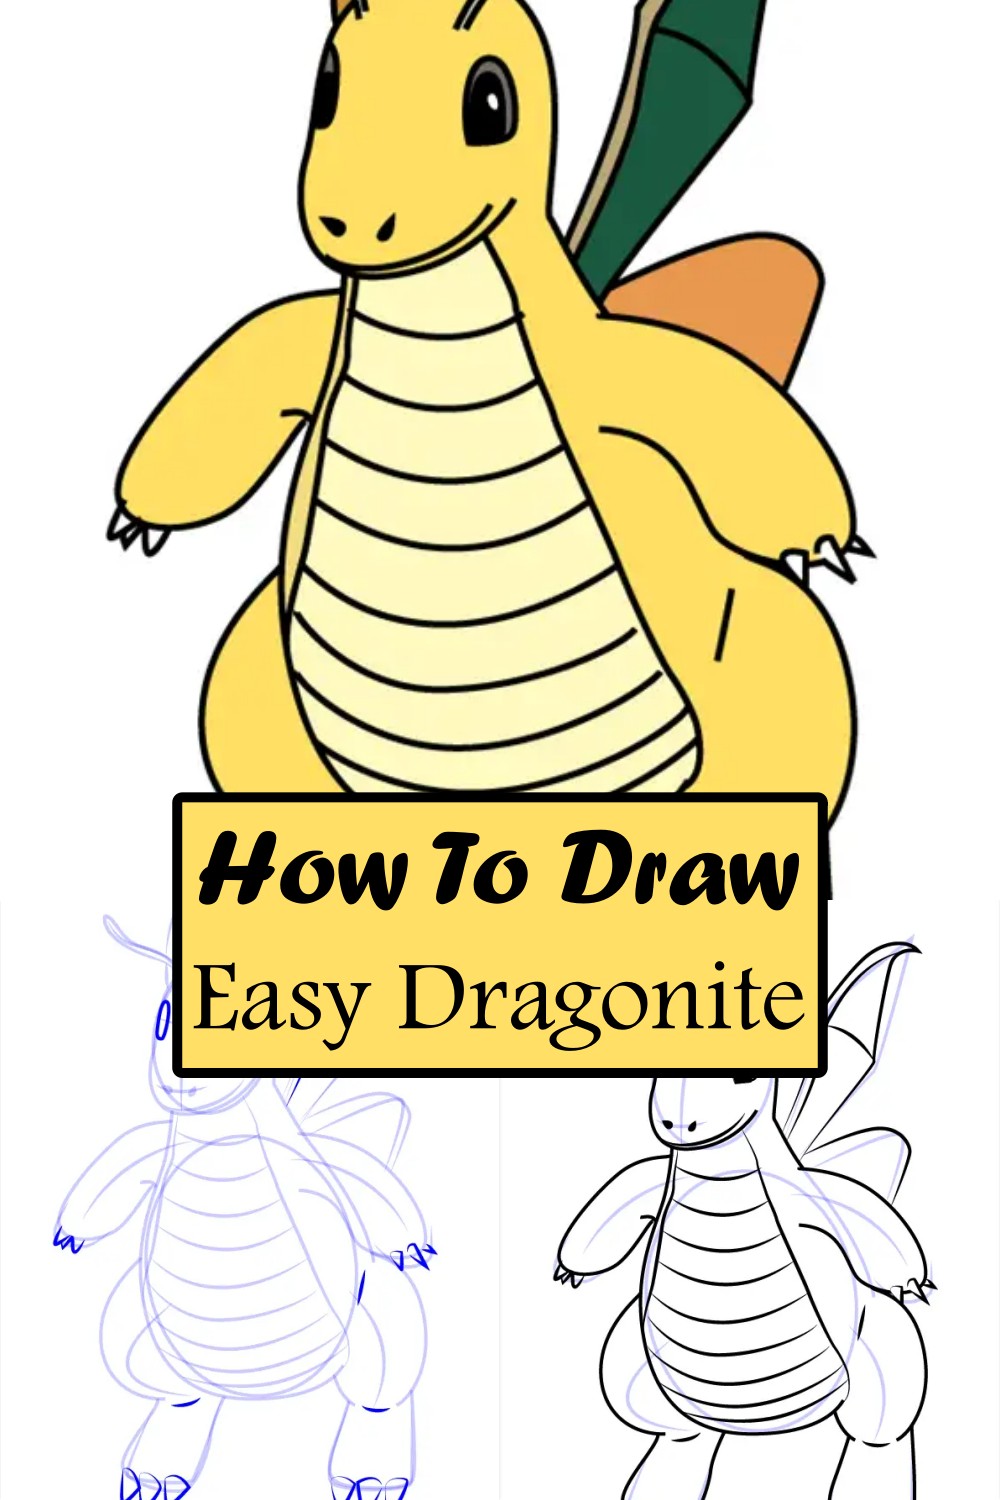 How To Draw Easy Dragonite